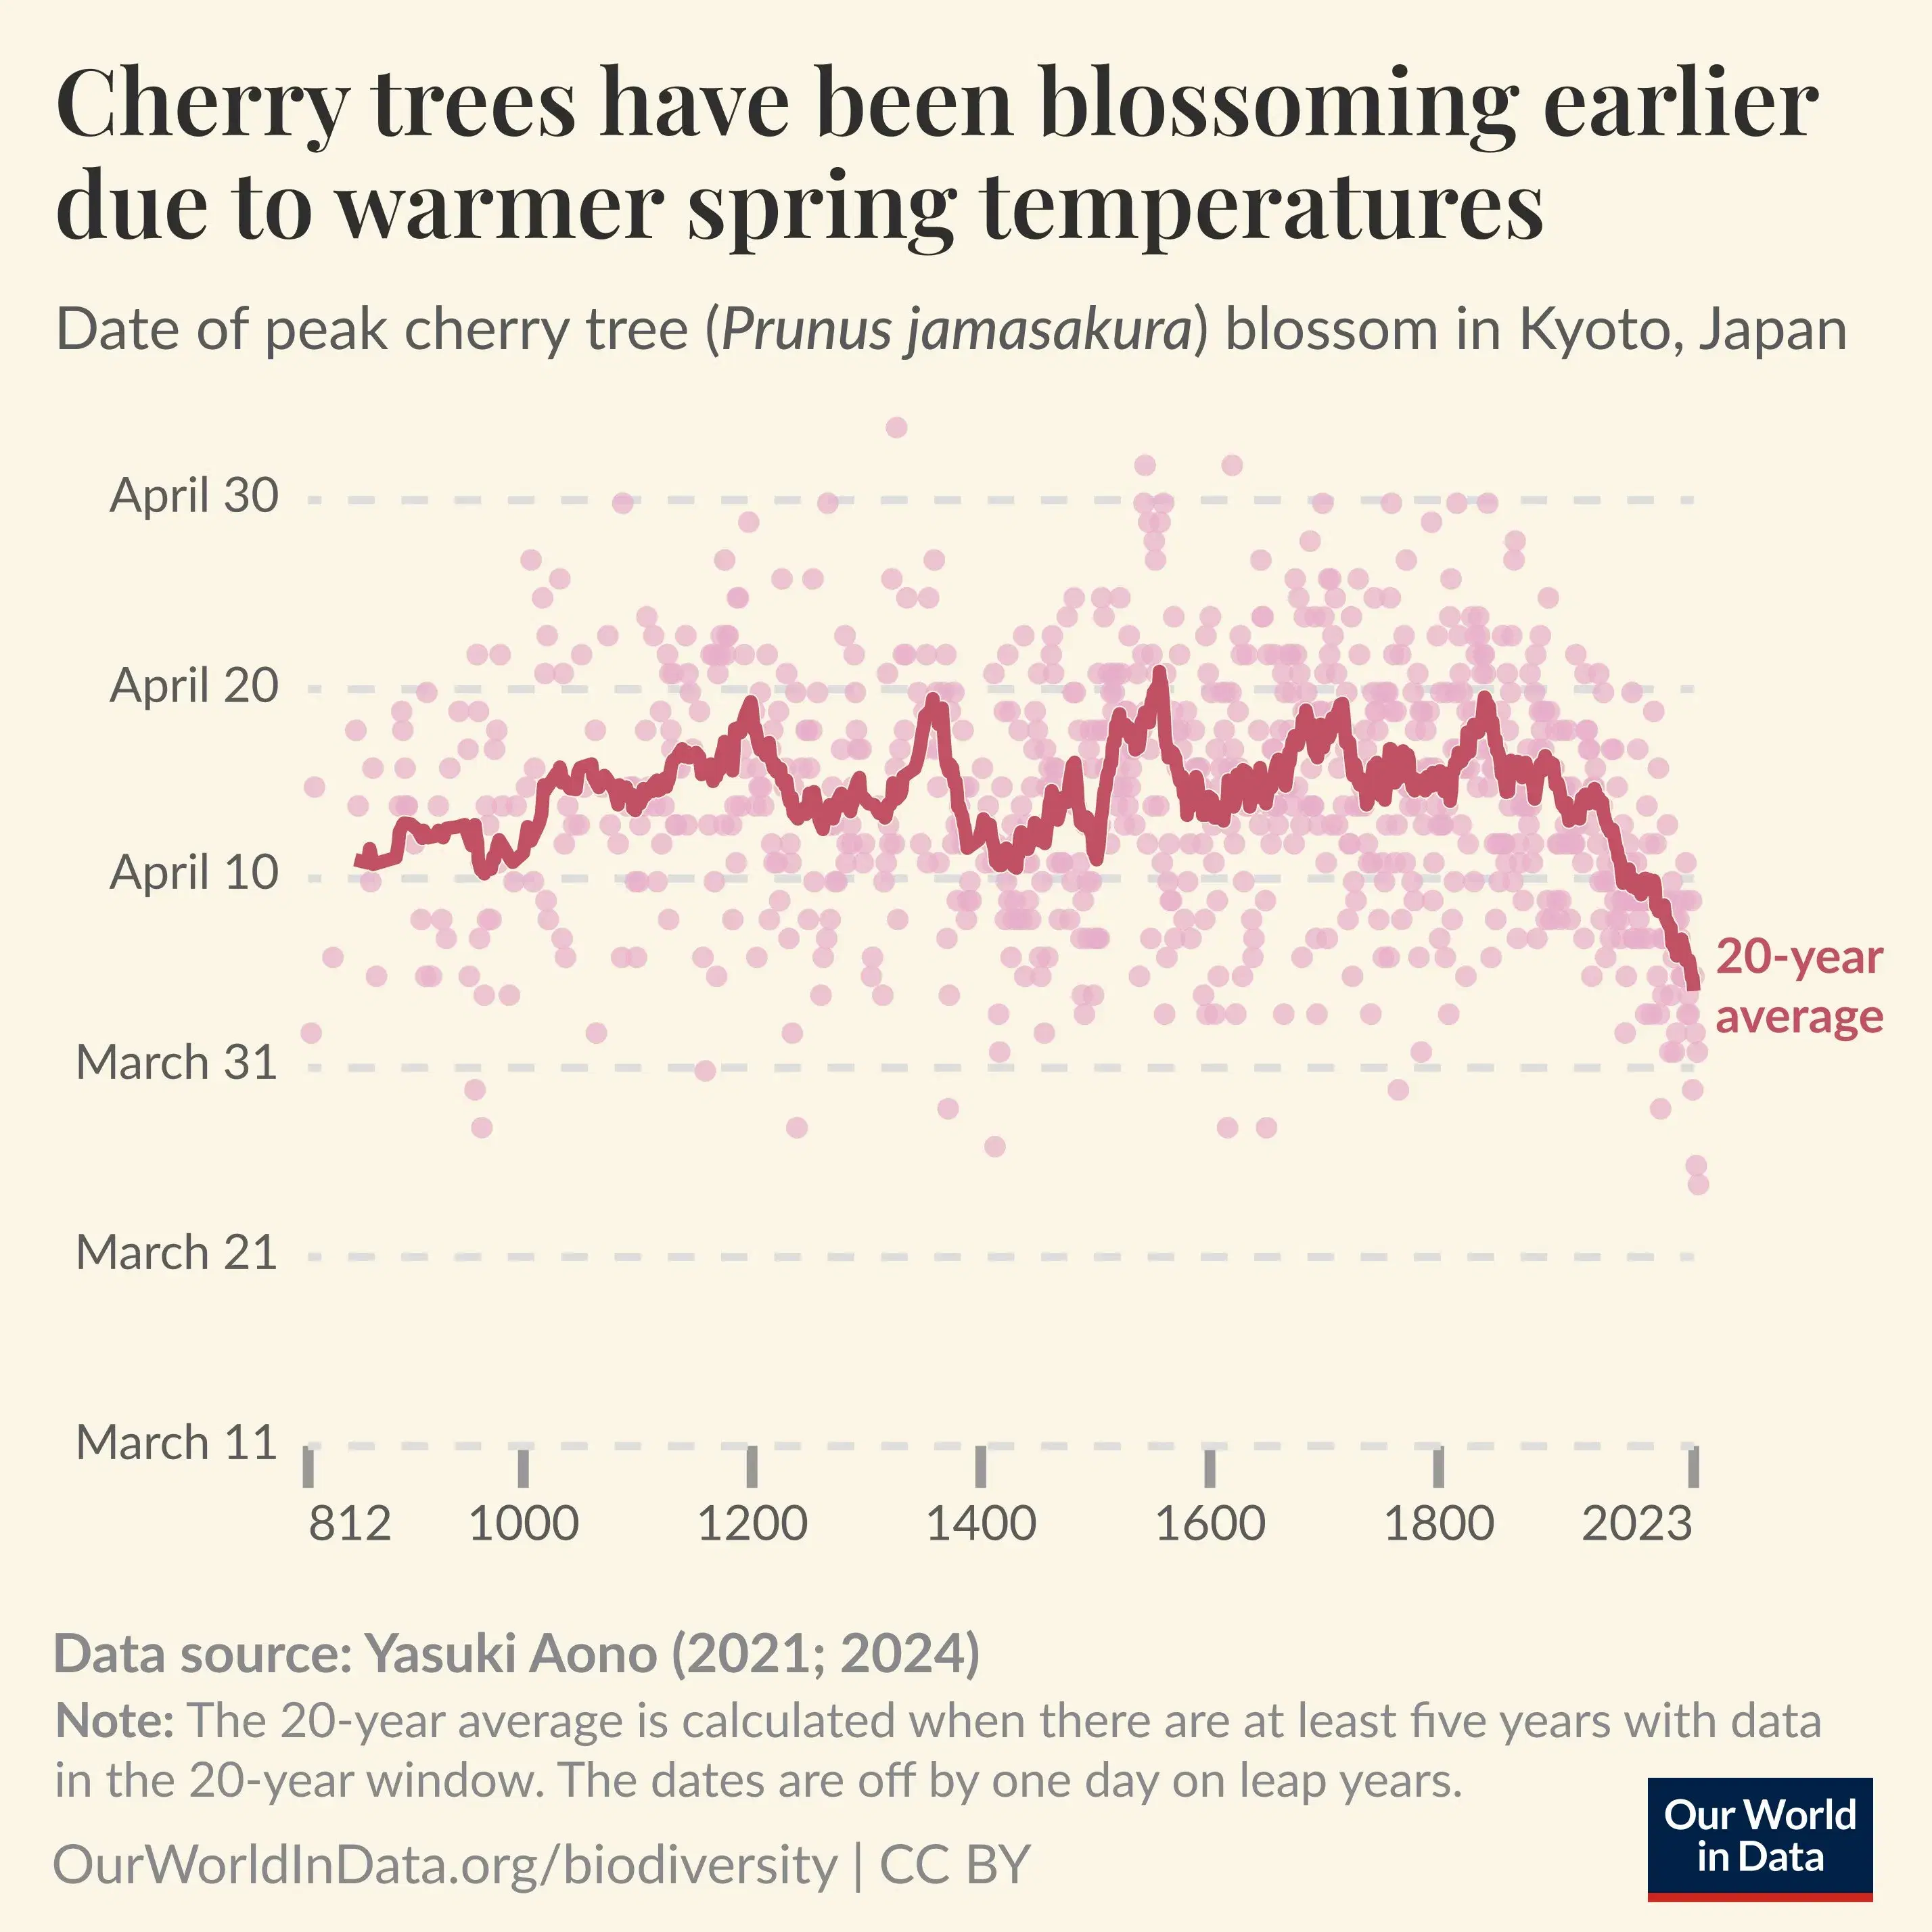 Cherry Trees Have Been Blossoming Earlier Due to Warmer Spring Temperatures